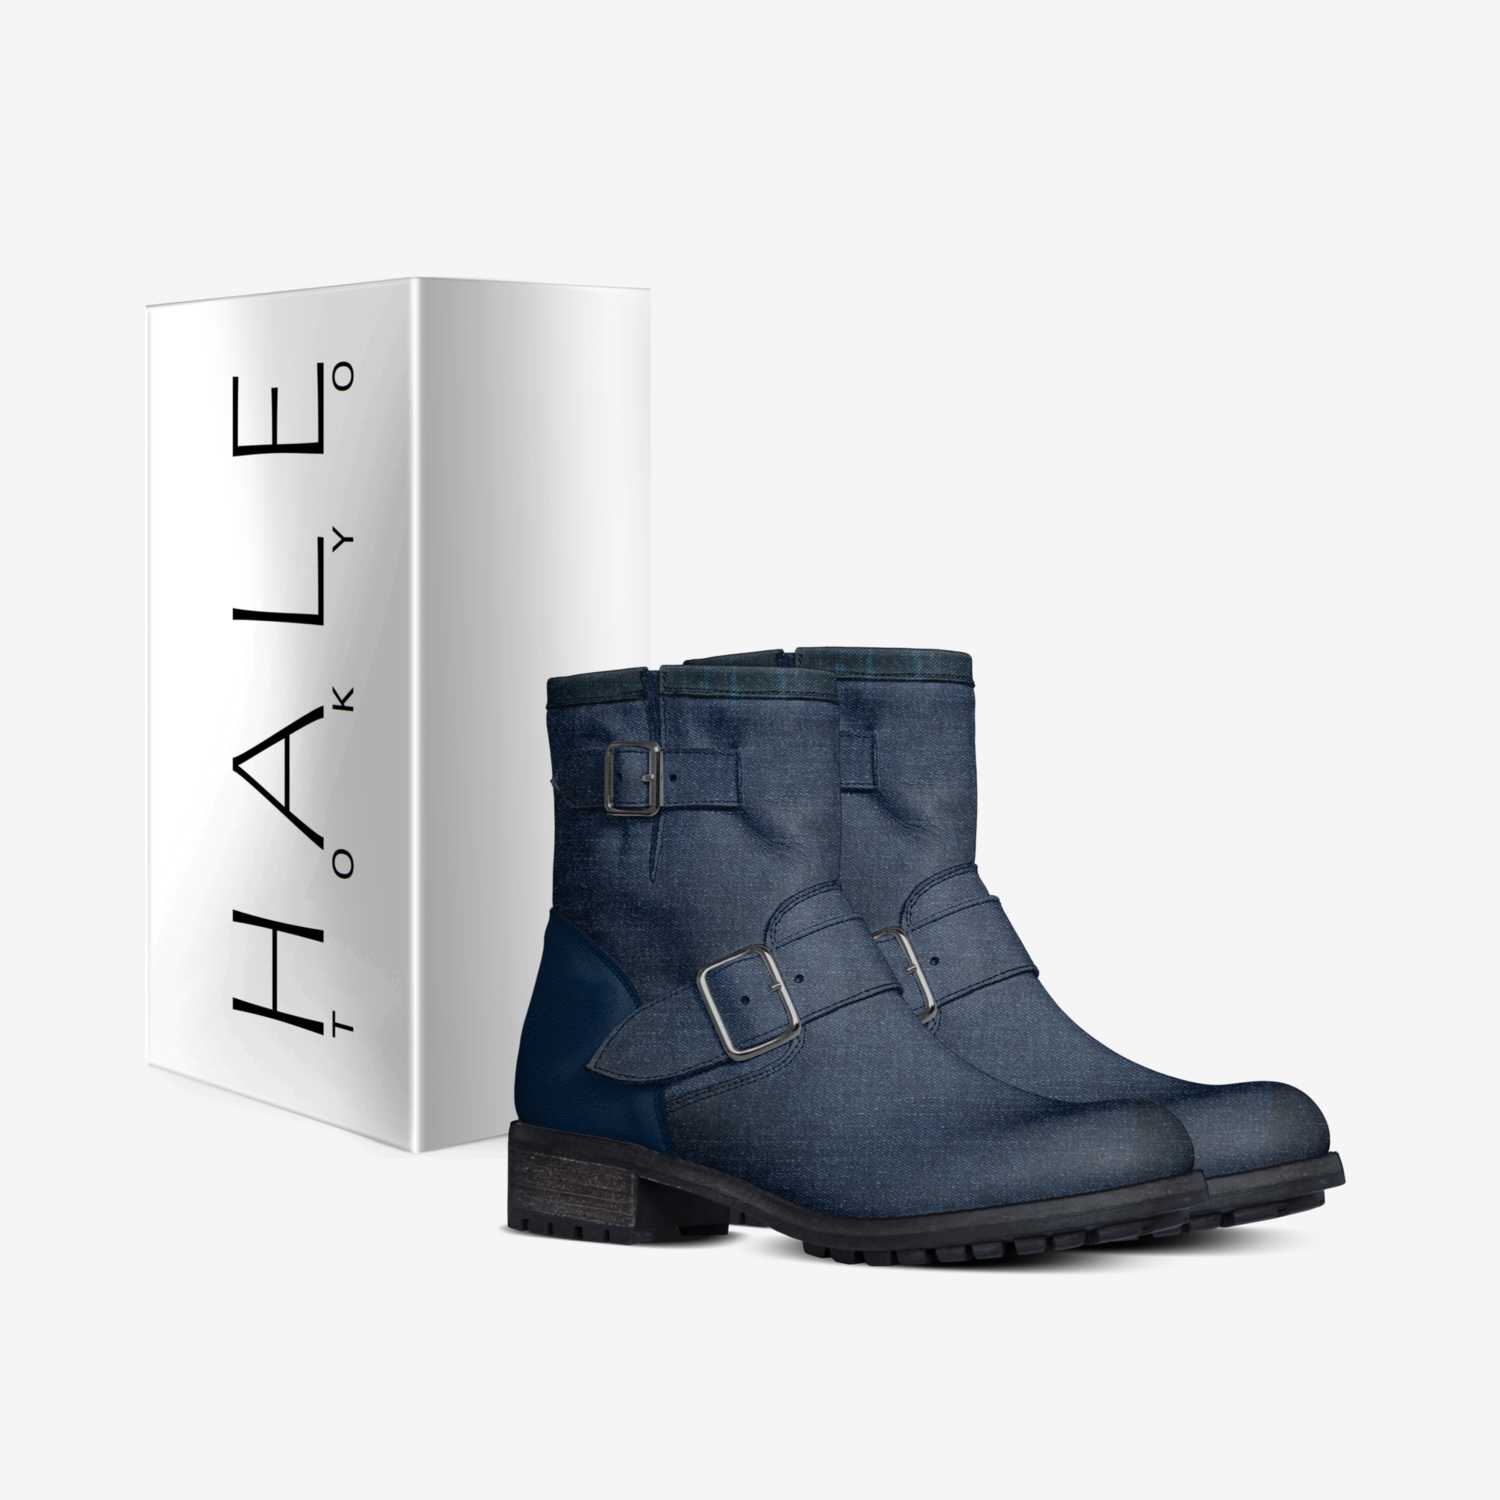 HALE Tokyo custom made in Italy shoes by Sayaka Ono | Box view